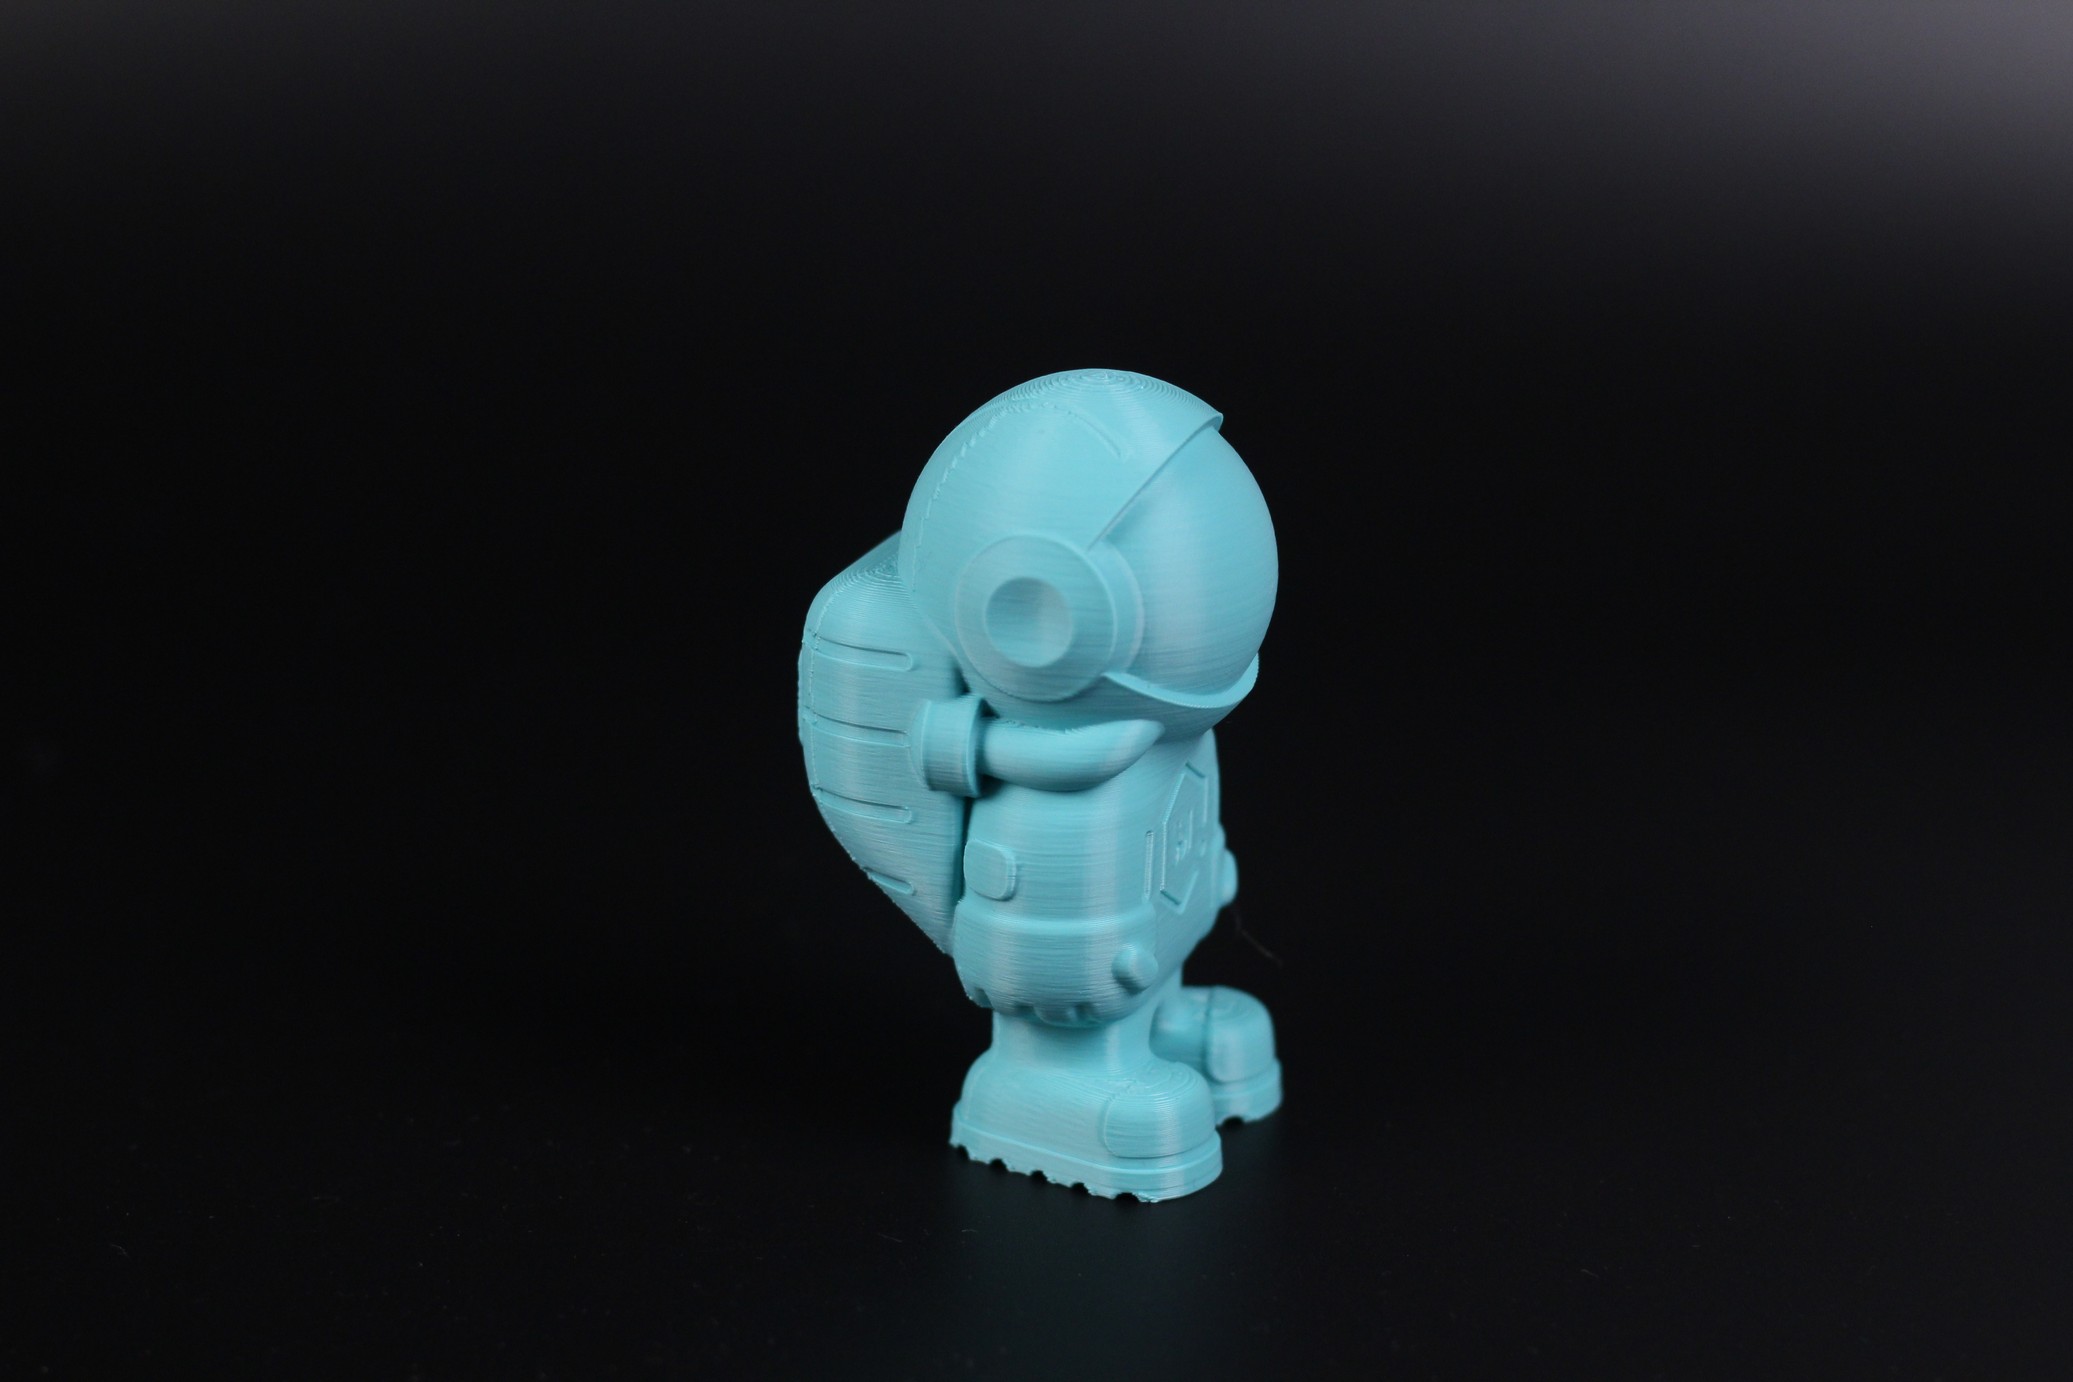 Phil A Ment printed on Anycubic Kobra Extrusion inconsistency 4 | Anycubic Kobra Review: The New Budget Standard